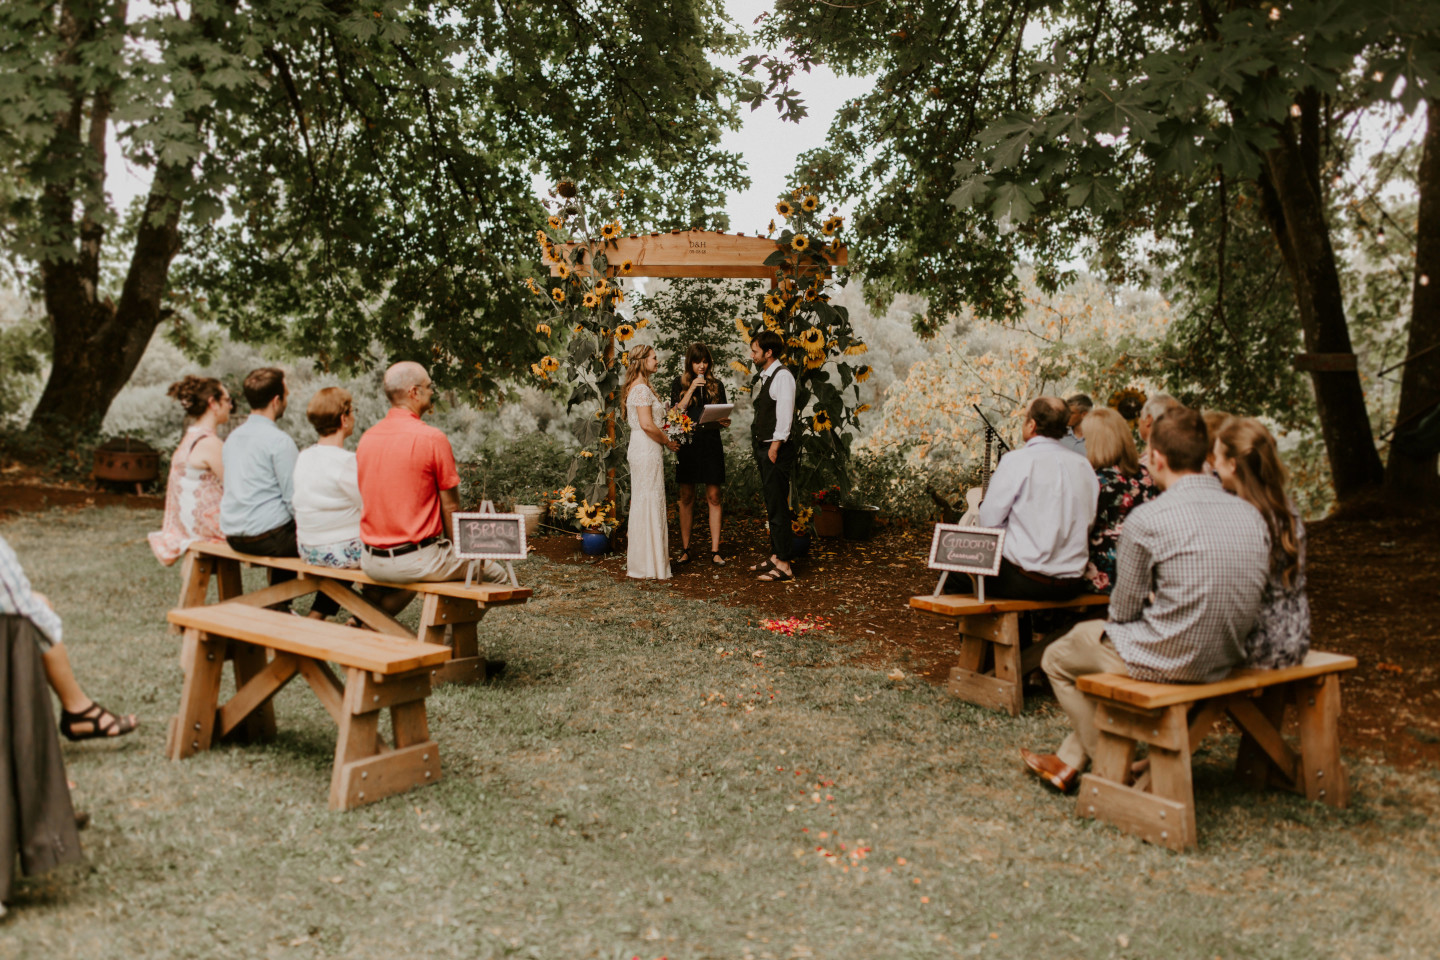 Dan and Hannah at the altar in Corvallis, Oregon. Intimate wedding photography in Corvallis Oregon by Sienna Plus Josh.